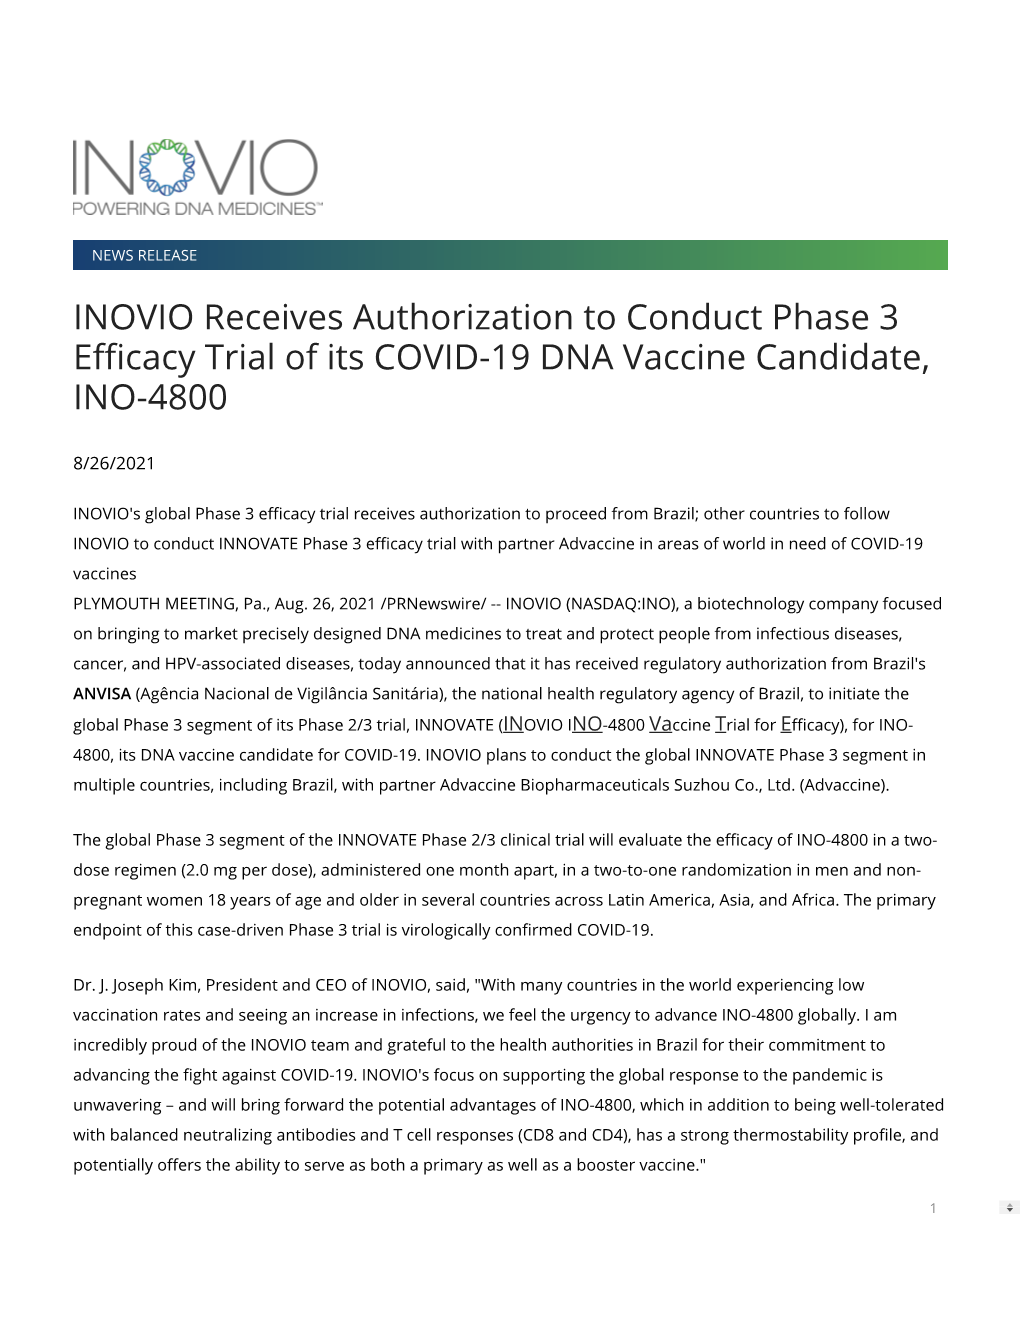 INOVIO Receives Authorization to Conduct Phase 3 E Cacy Trial of Its